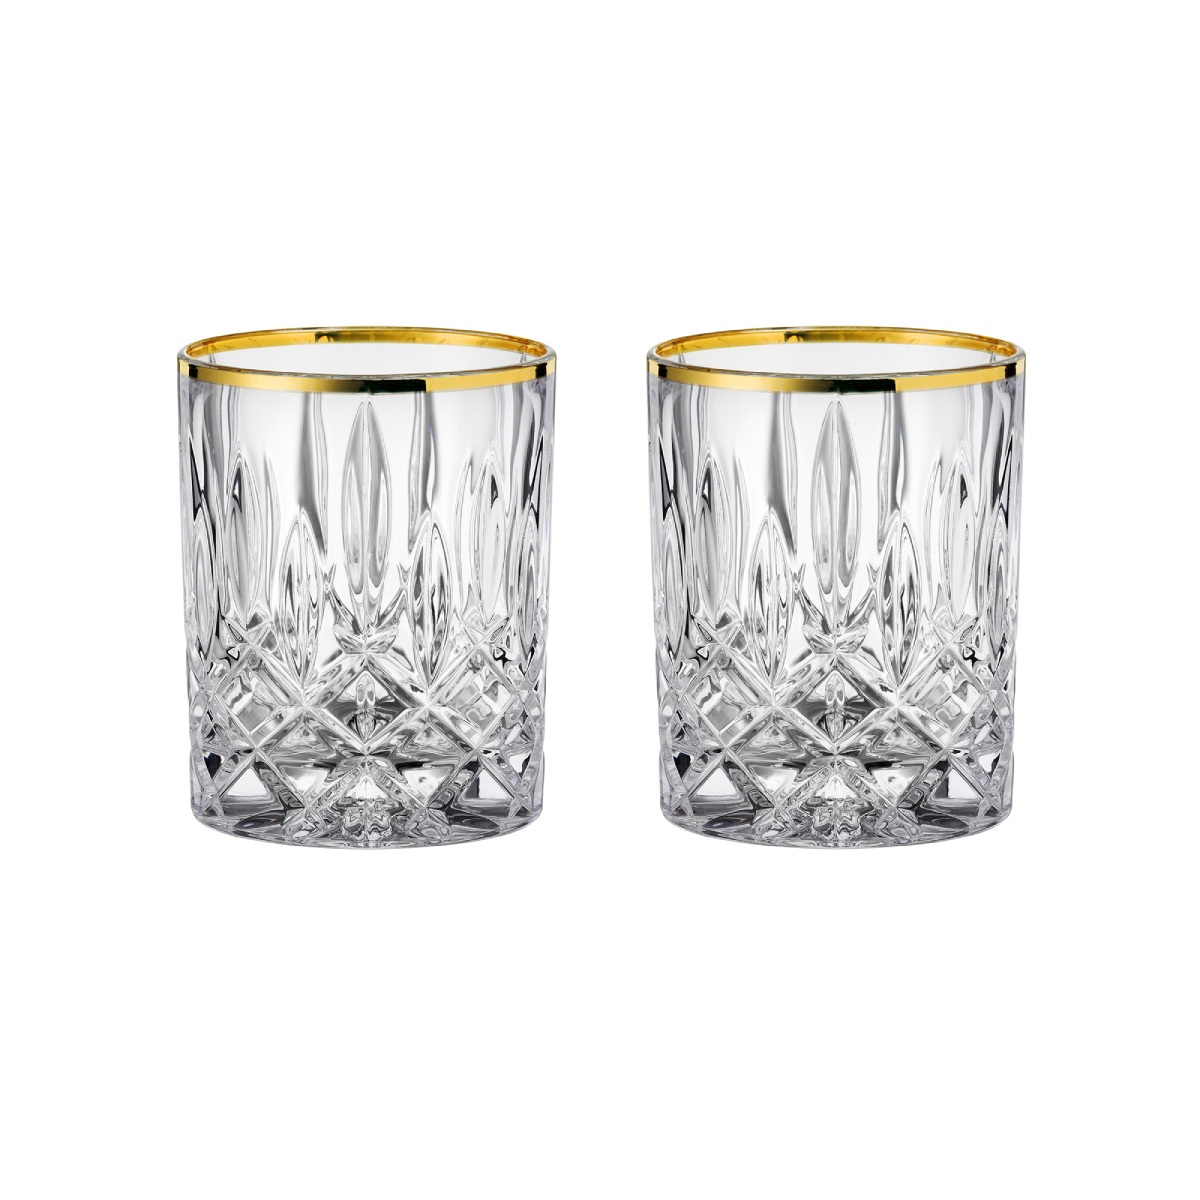 Nachtmann Noblesse Gold Whisky Tumber Set of 2 image number null